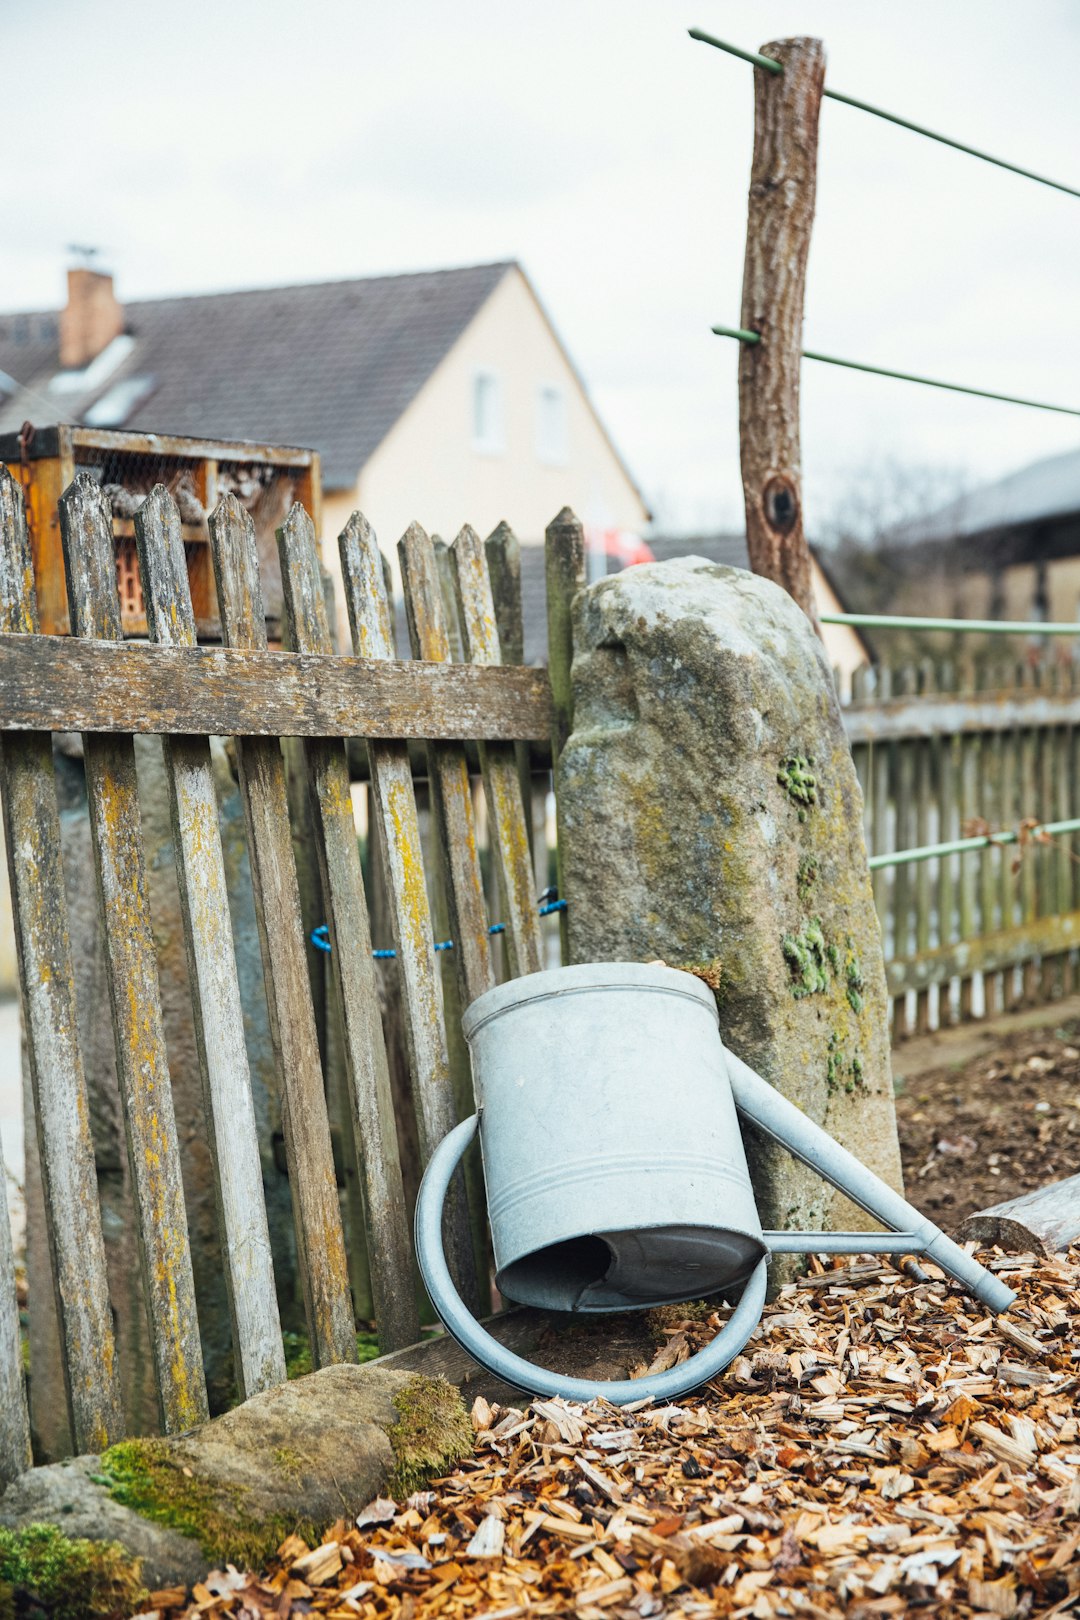 gray watering can by fence